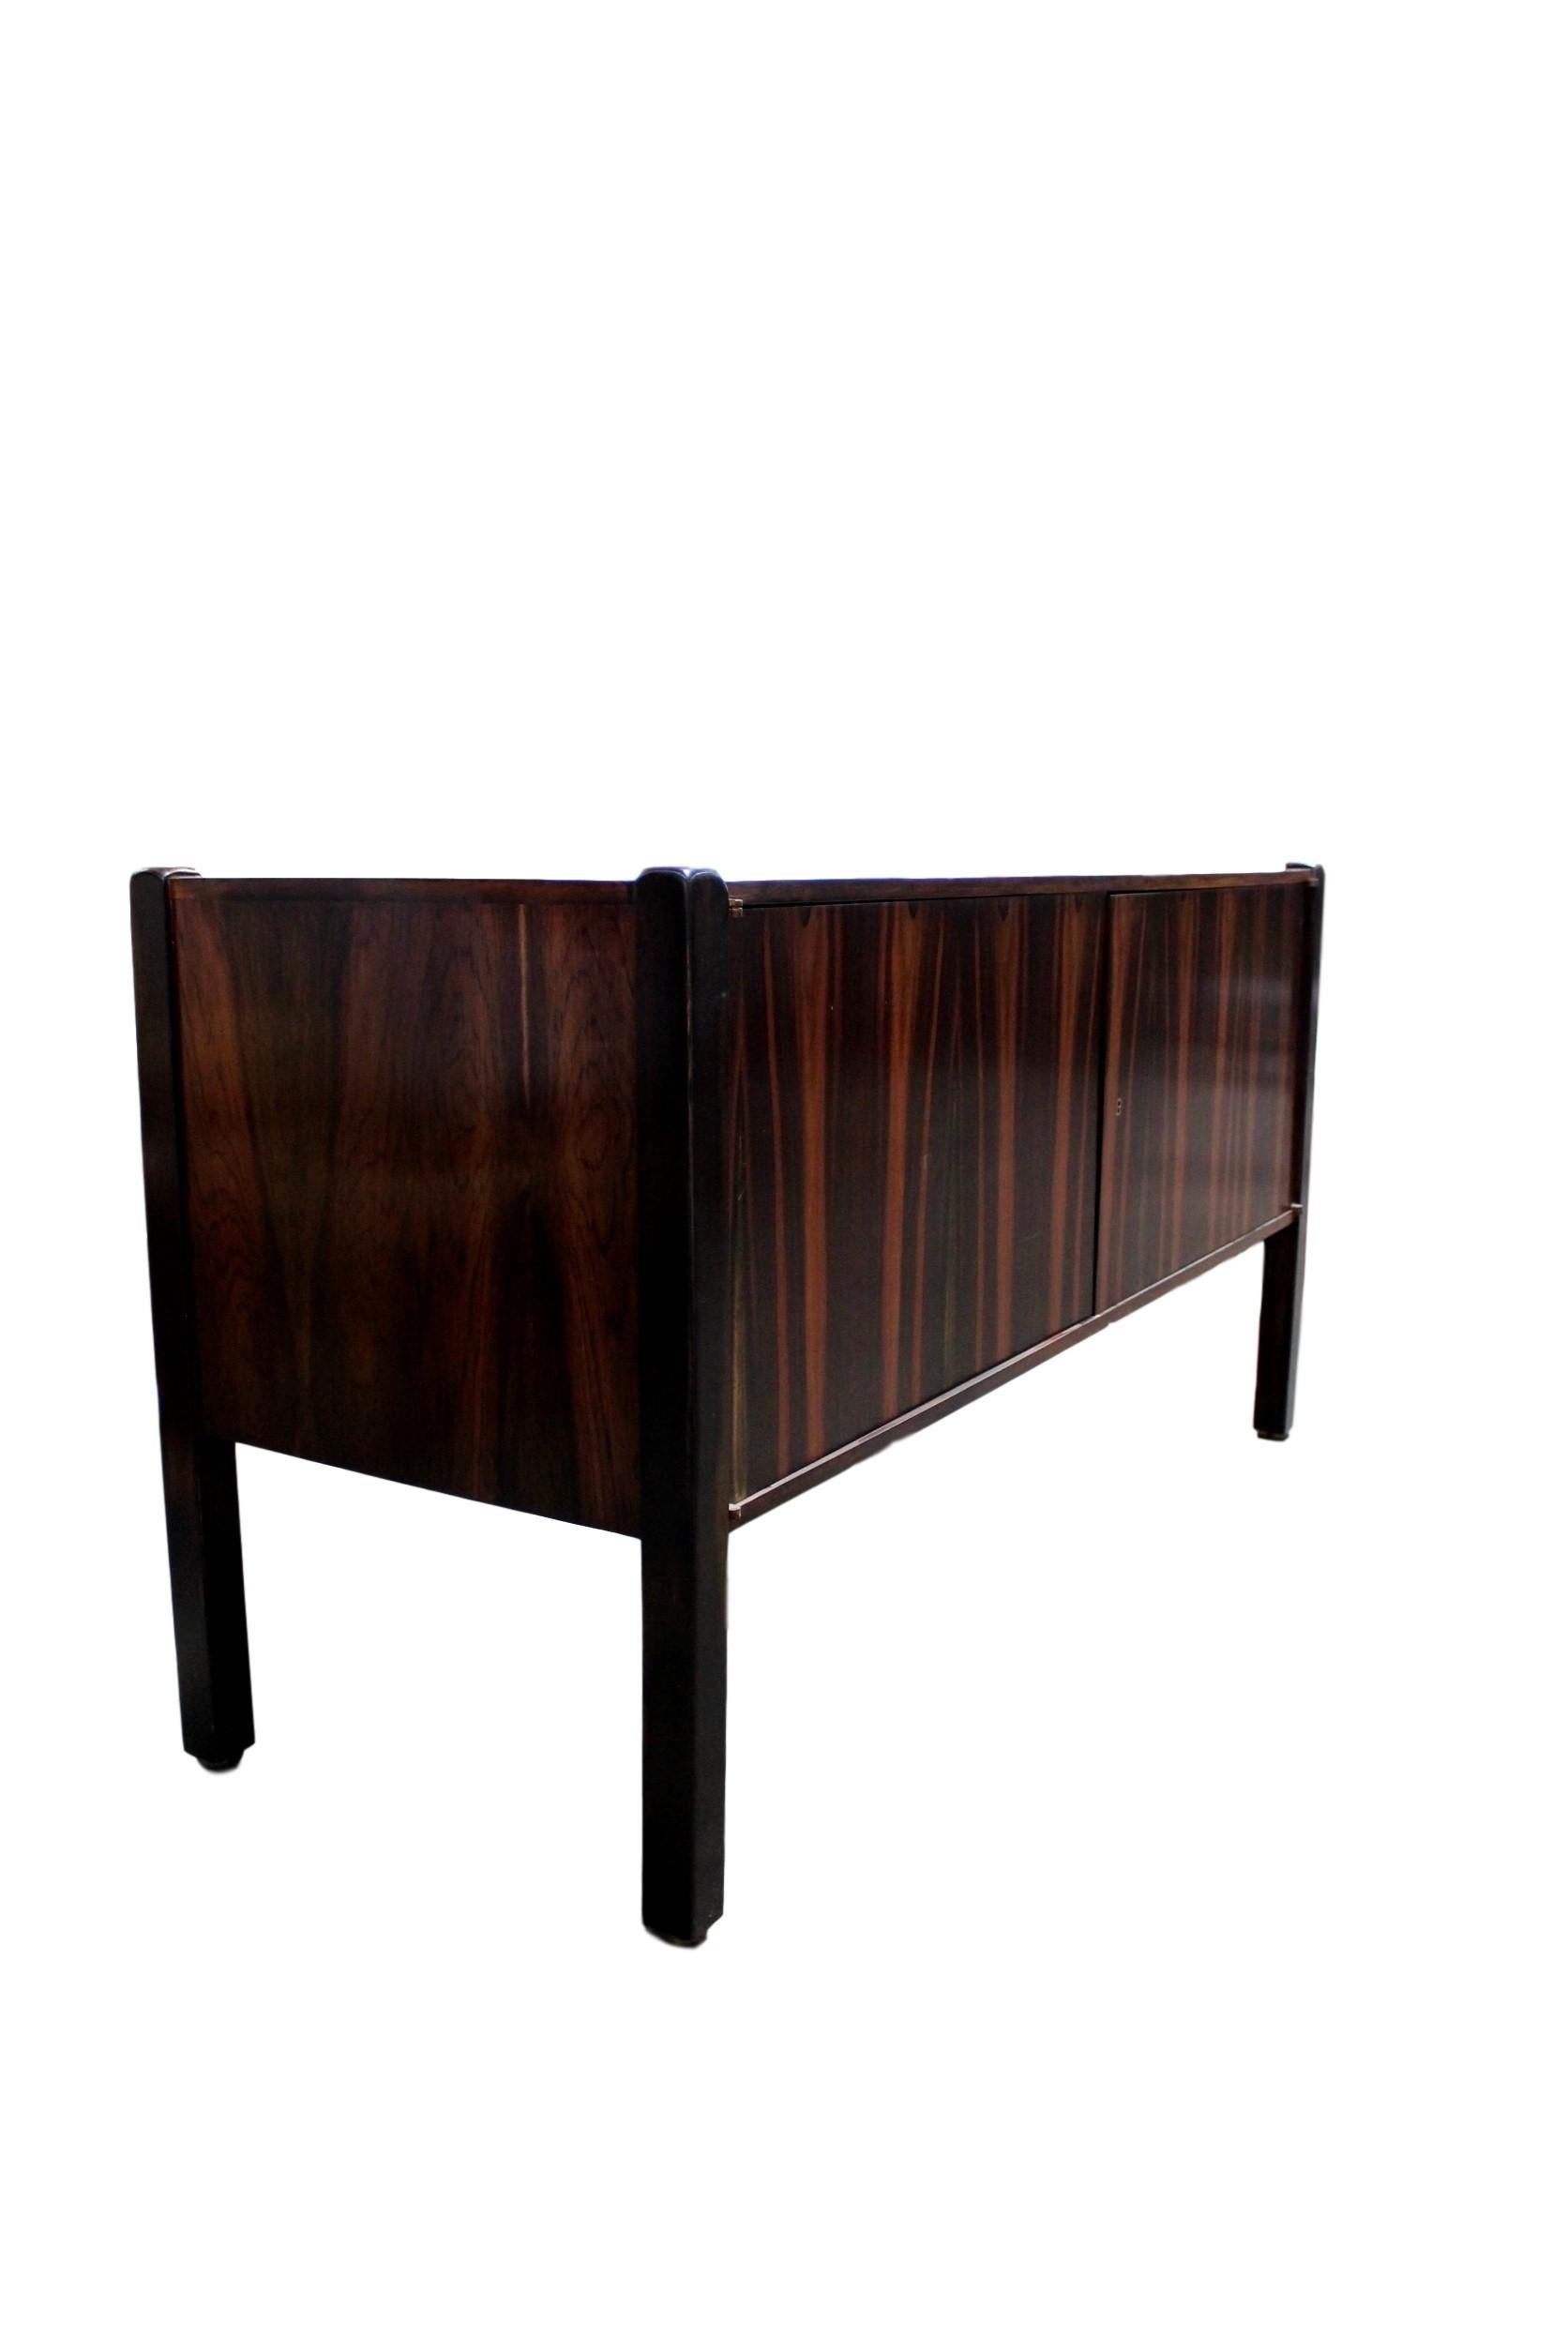 A stunning and exclusive vintage sideboard by the well known Brazilian designer Sergio Rodrigues. It was made in Brazil during the 1960s. The color and grain patterns are gorgeous all-over, even the backside and the whole interior is beautifully